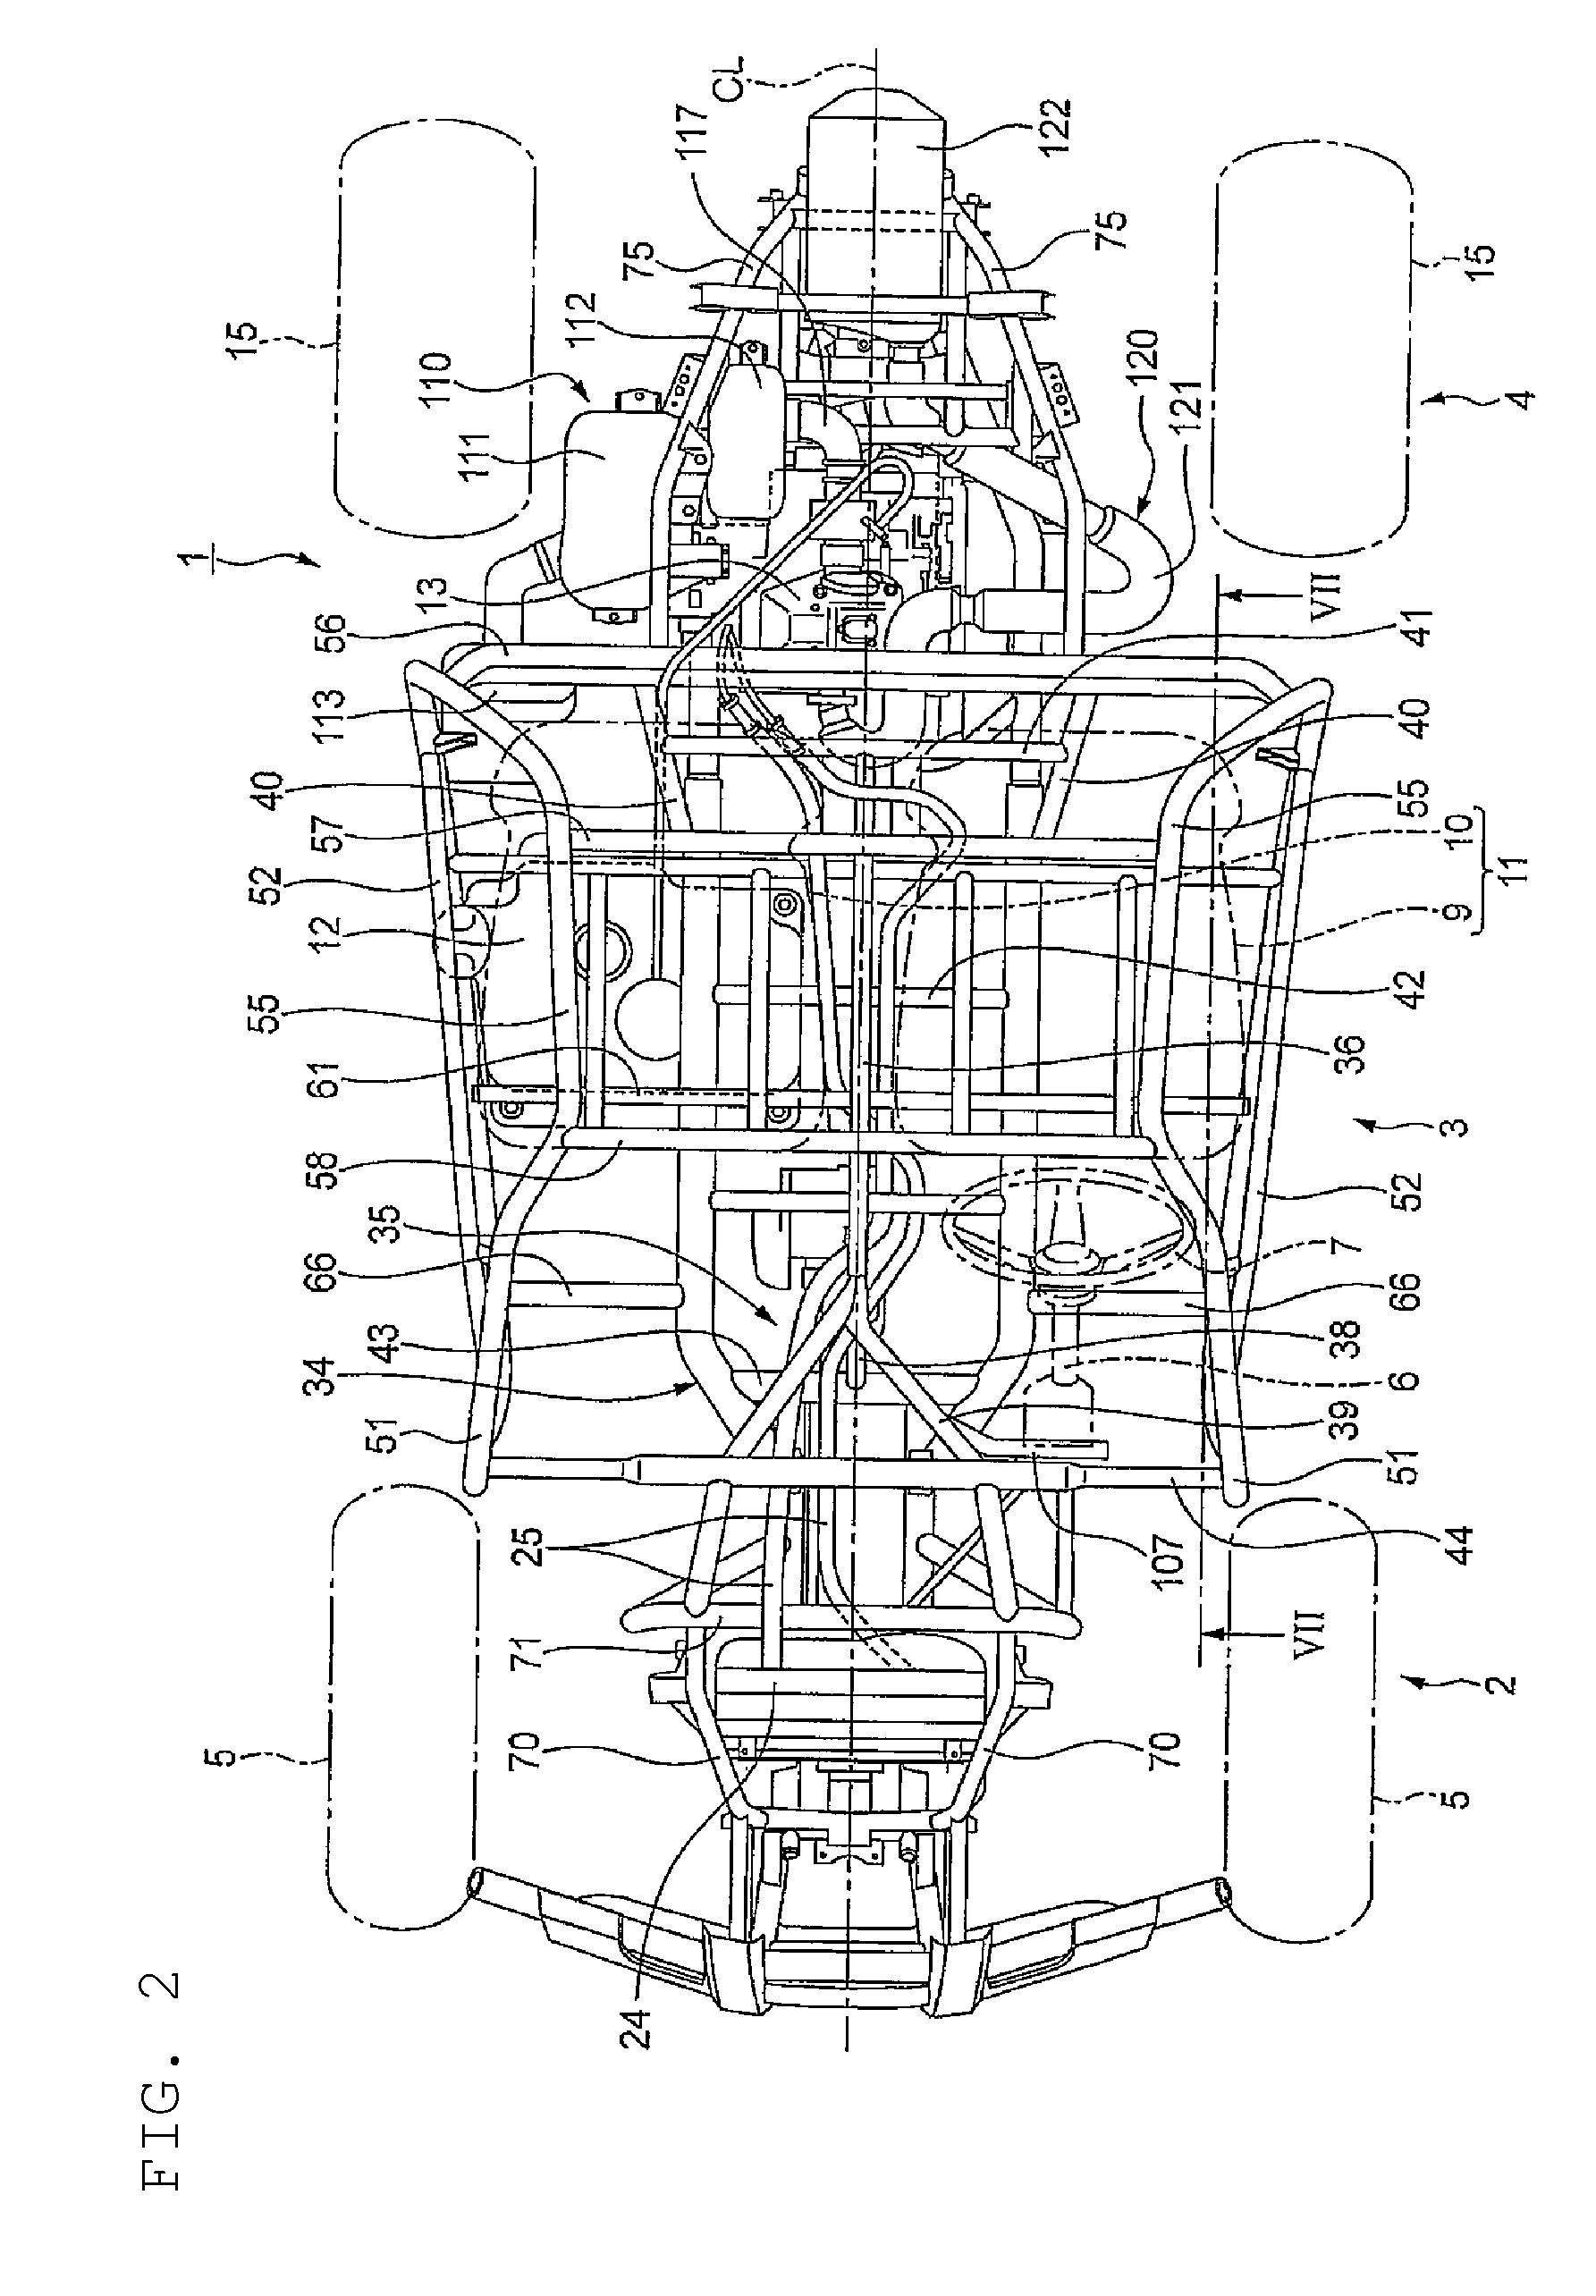 Intake structure of vehicle